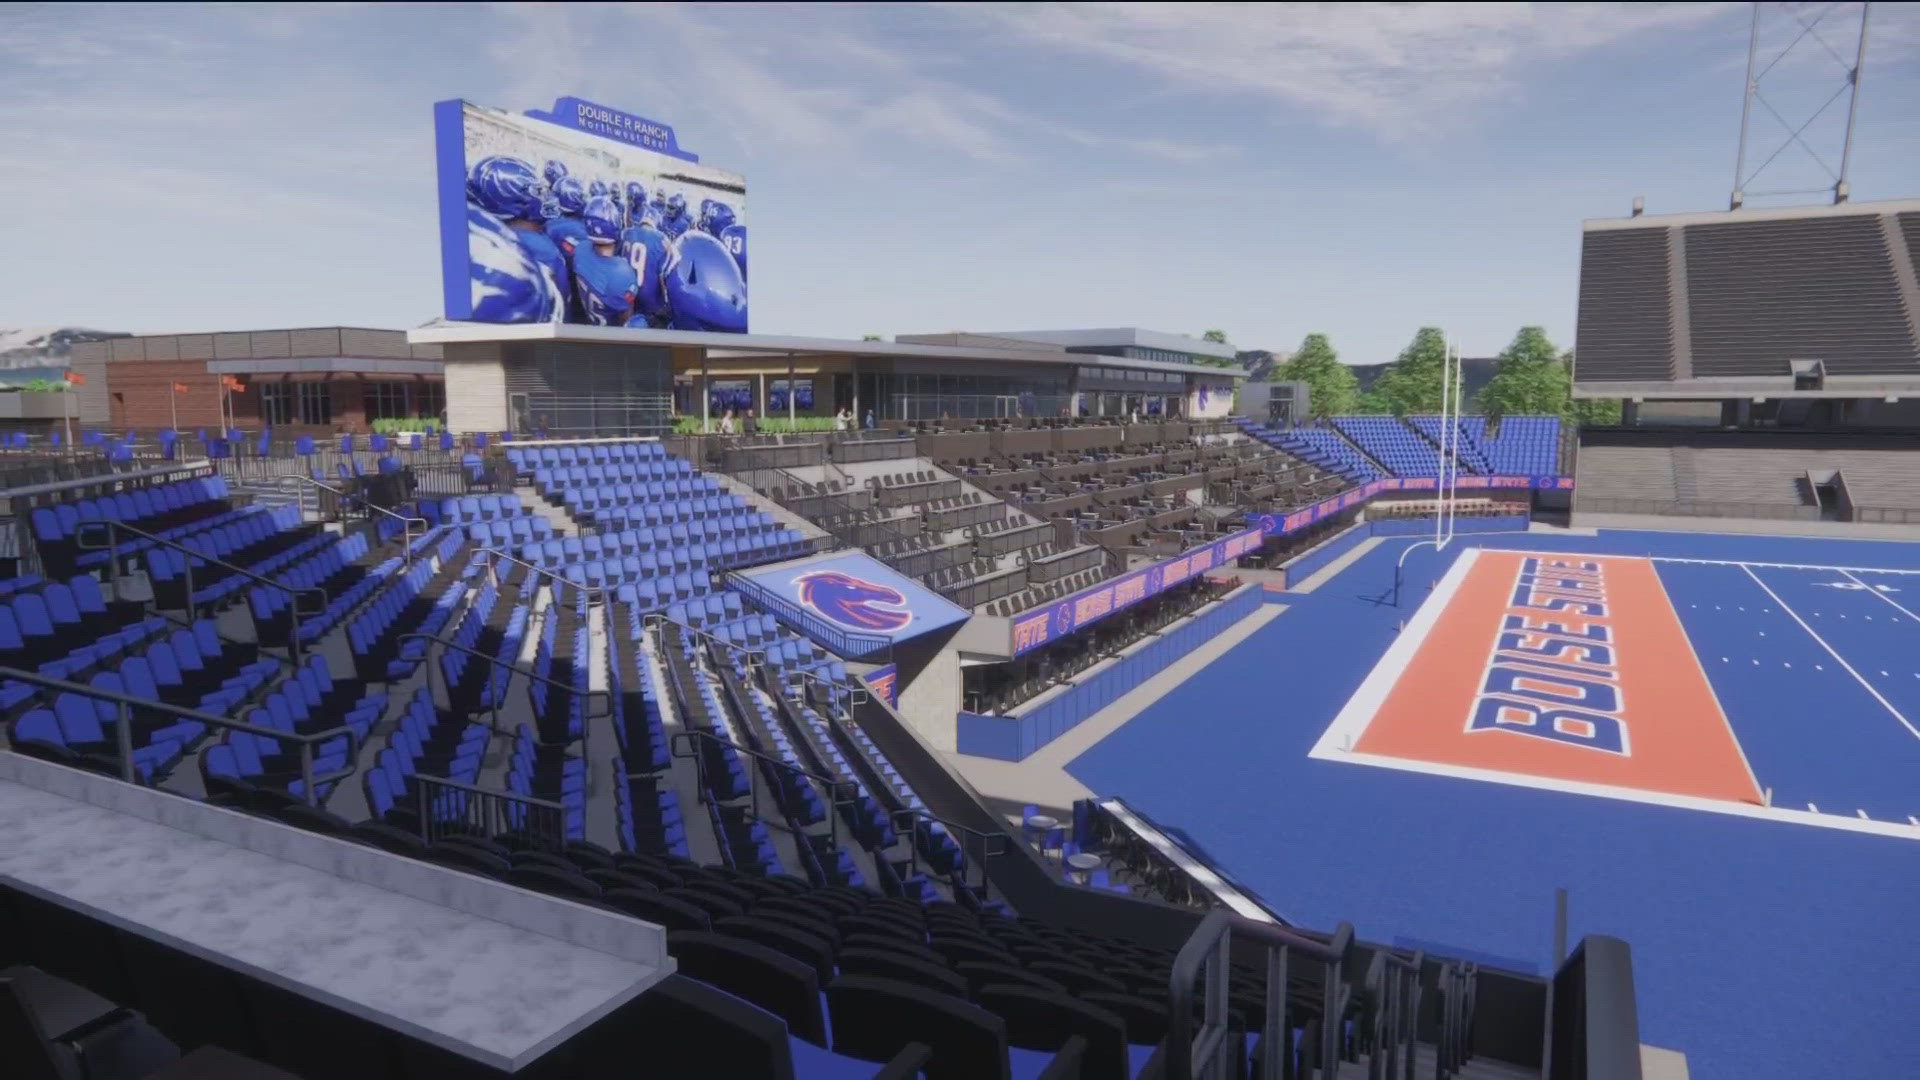 The estimated $65 million project includes 12 field-level suites, 44 loge boxes, 148 ledge seats and 882 club seats. Construction is expected to begin in January.